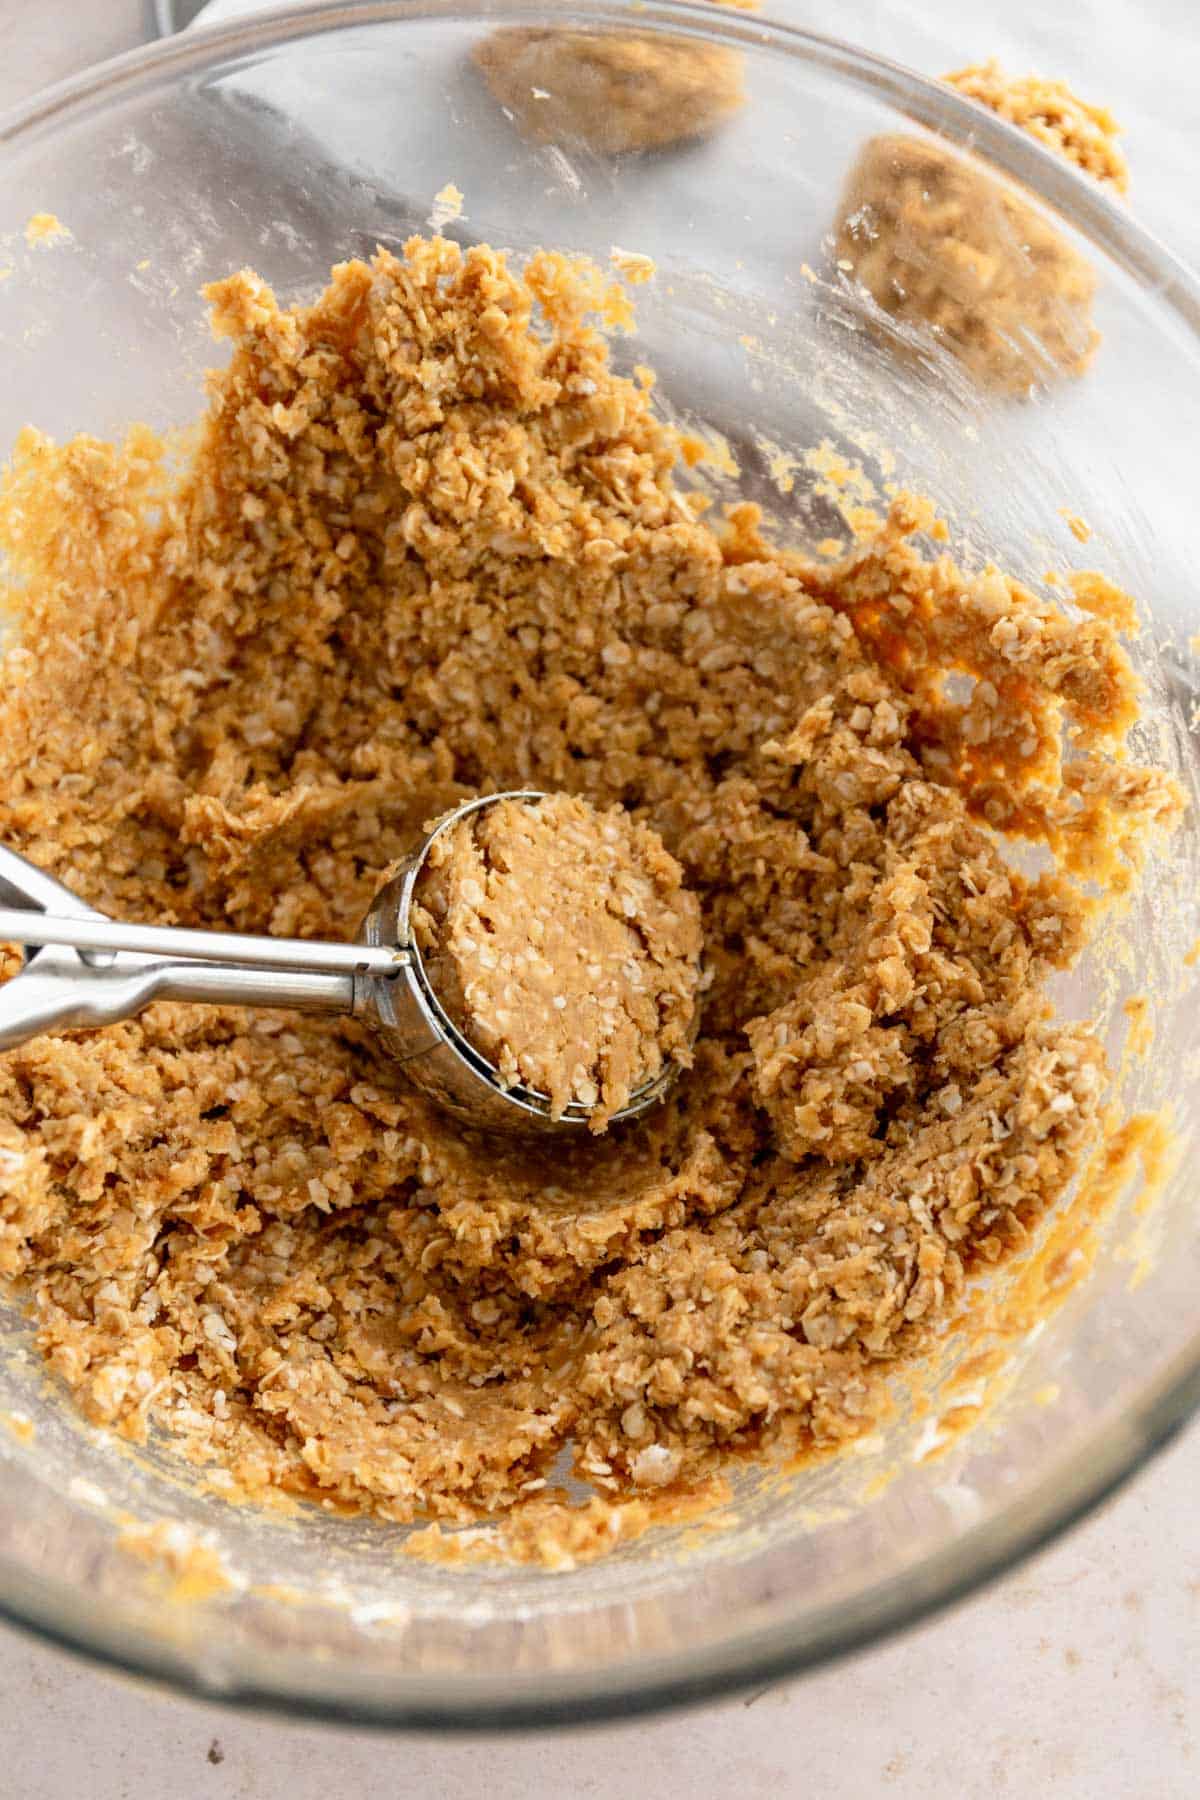 oats peanut butter and maple syrup mixed together in a bowl